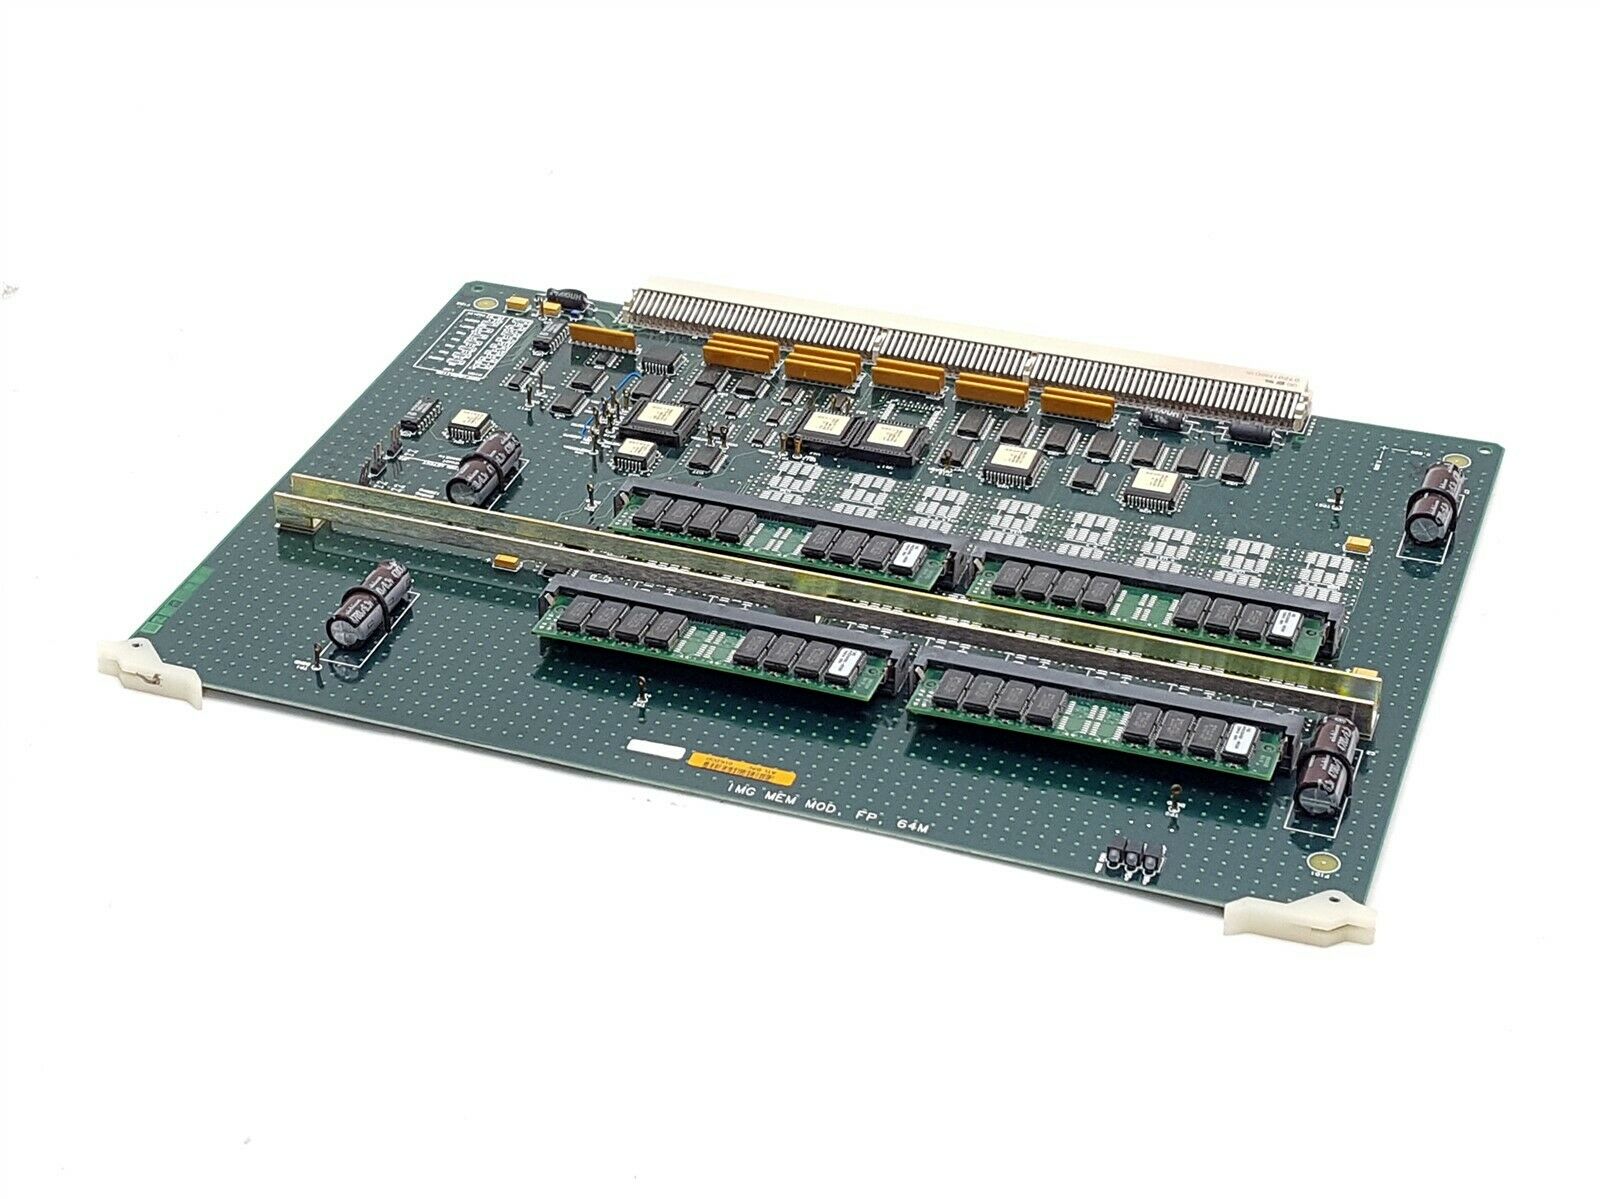 Philips ATL HDI-5000 Ultrasound SONOCT Image Memory Module Card 3500-2757-01 FP DIAGNOSTIC ULTRASOUND MACHINES FOR SALE